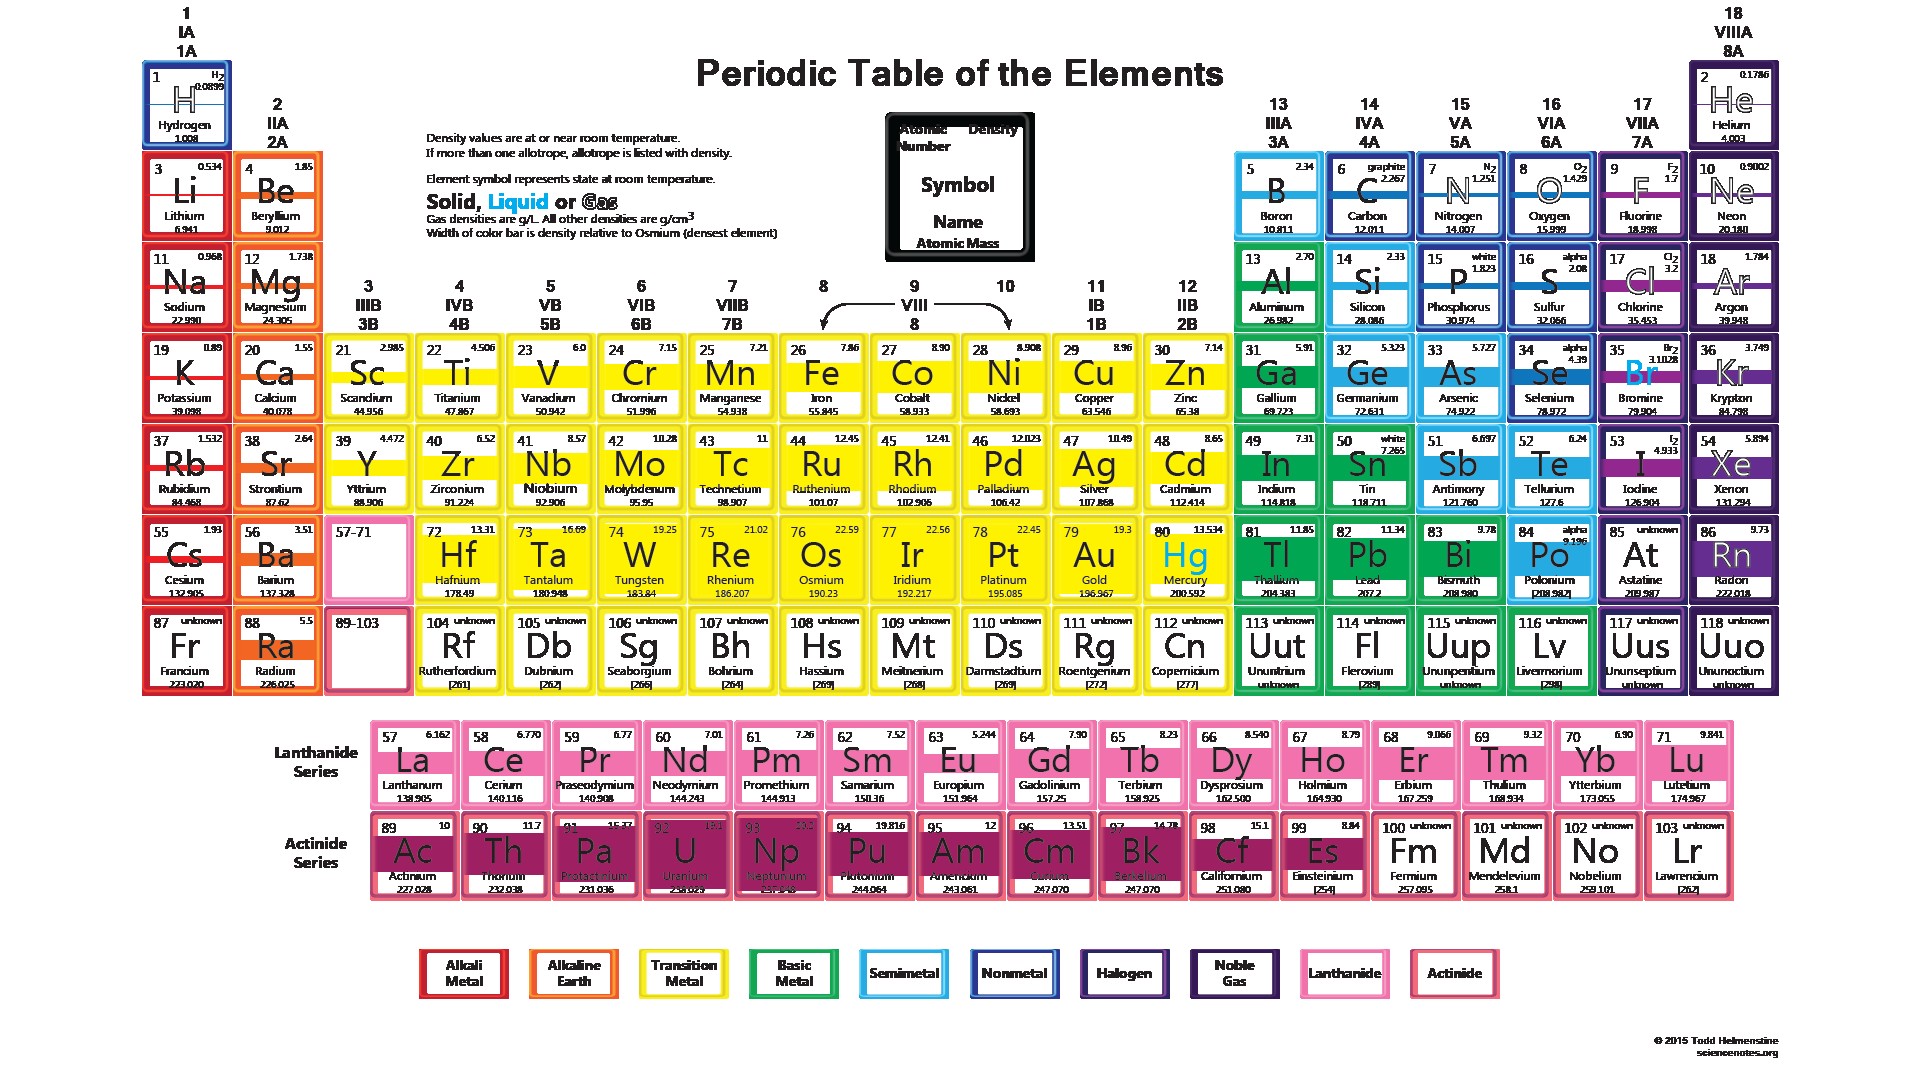 Periodic Table of Elements With Atomic Mass and Valency